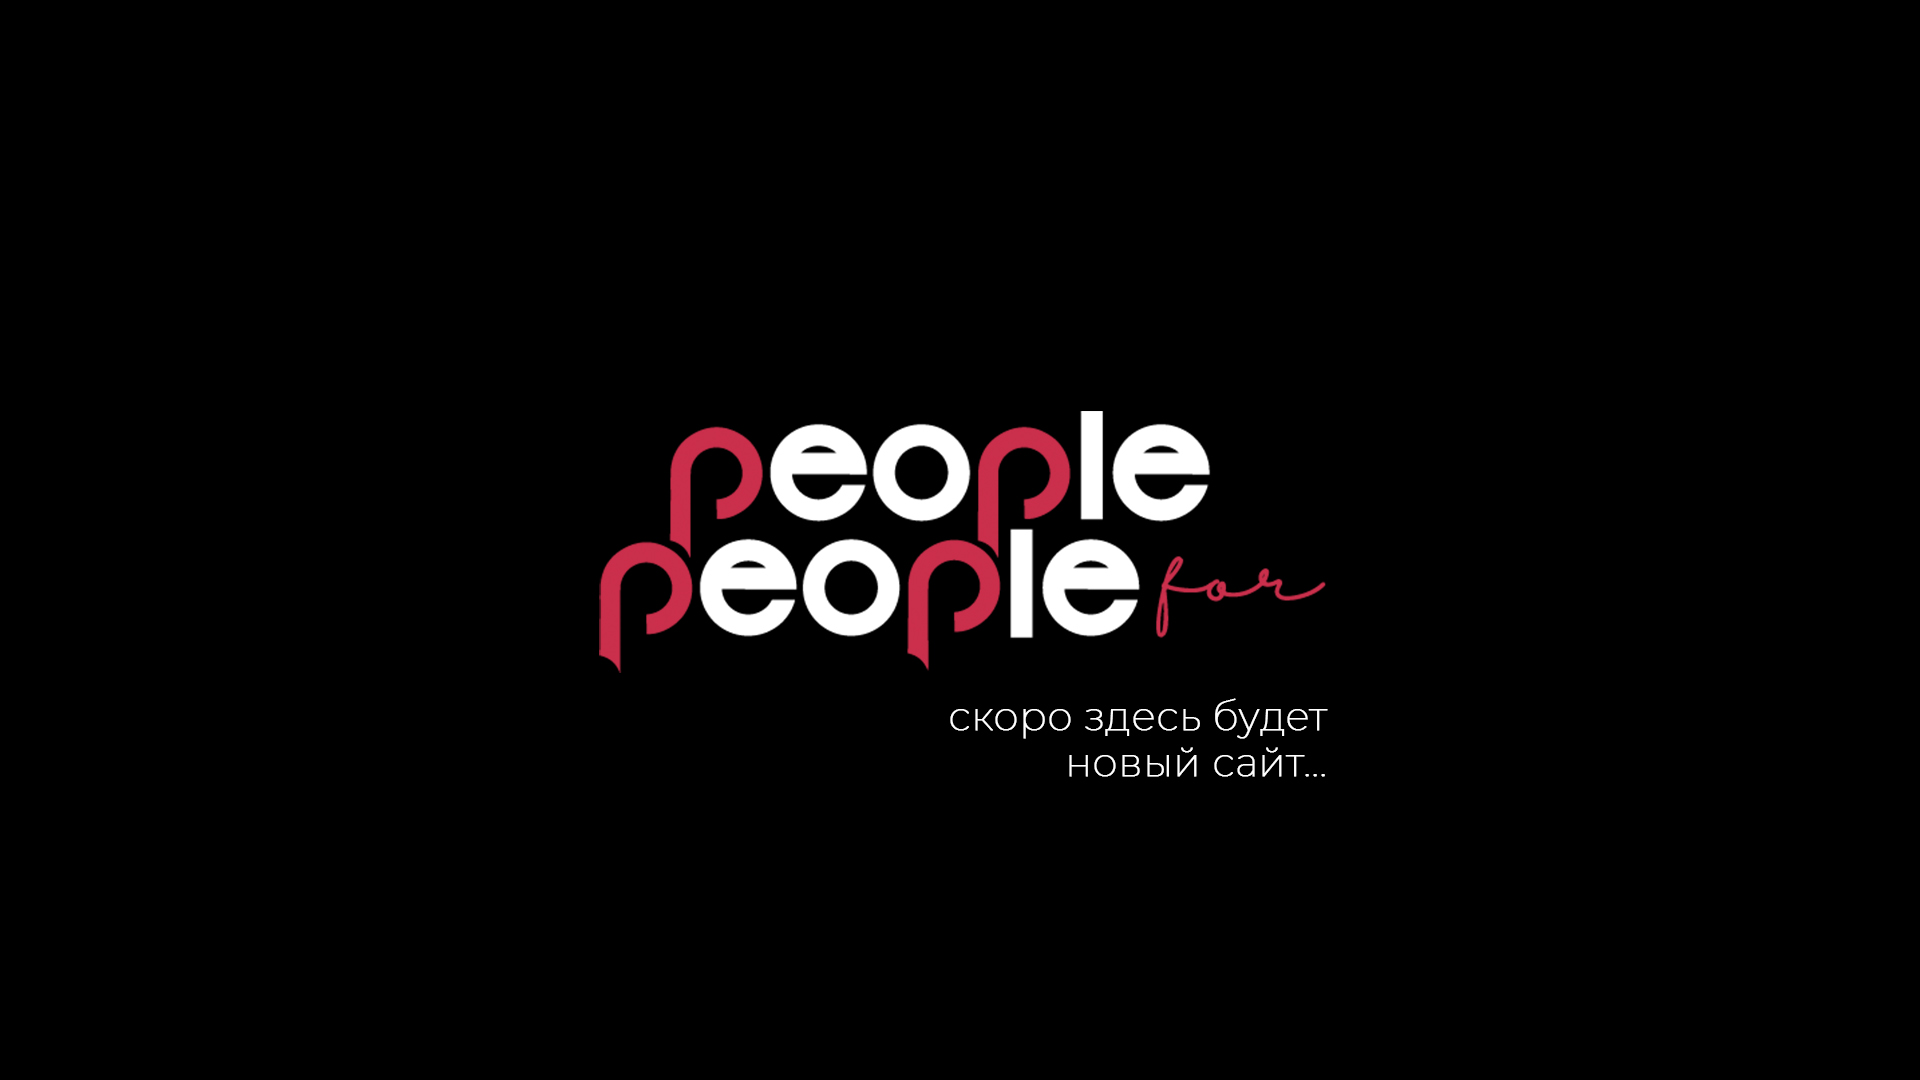 People For People